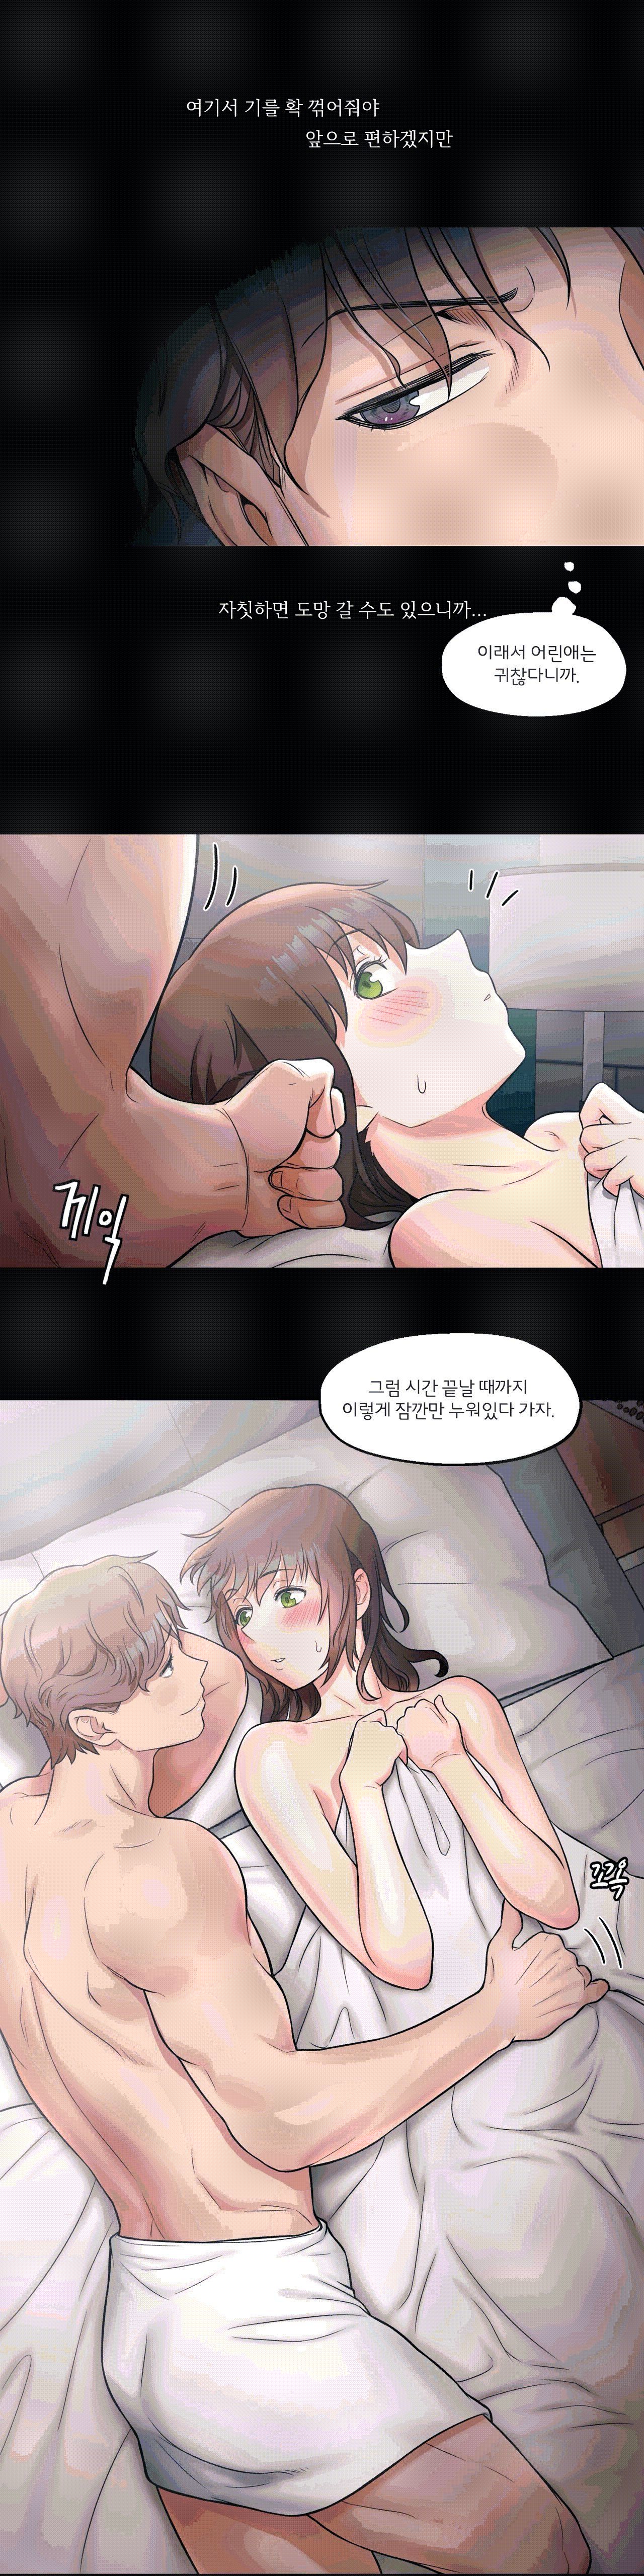 Sexercise Raw - Chapter 27 Page 9